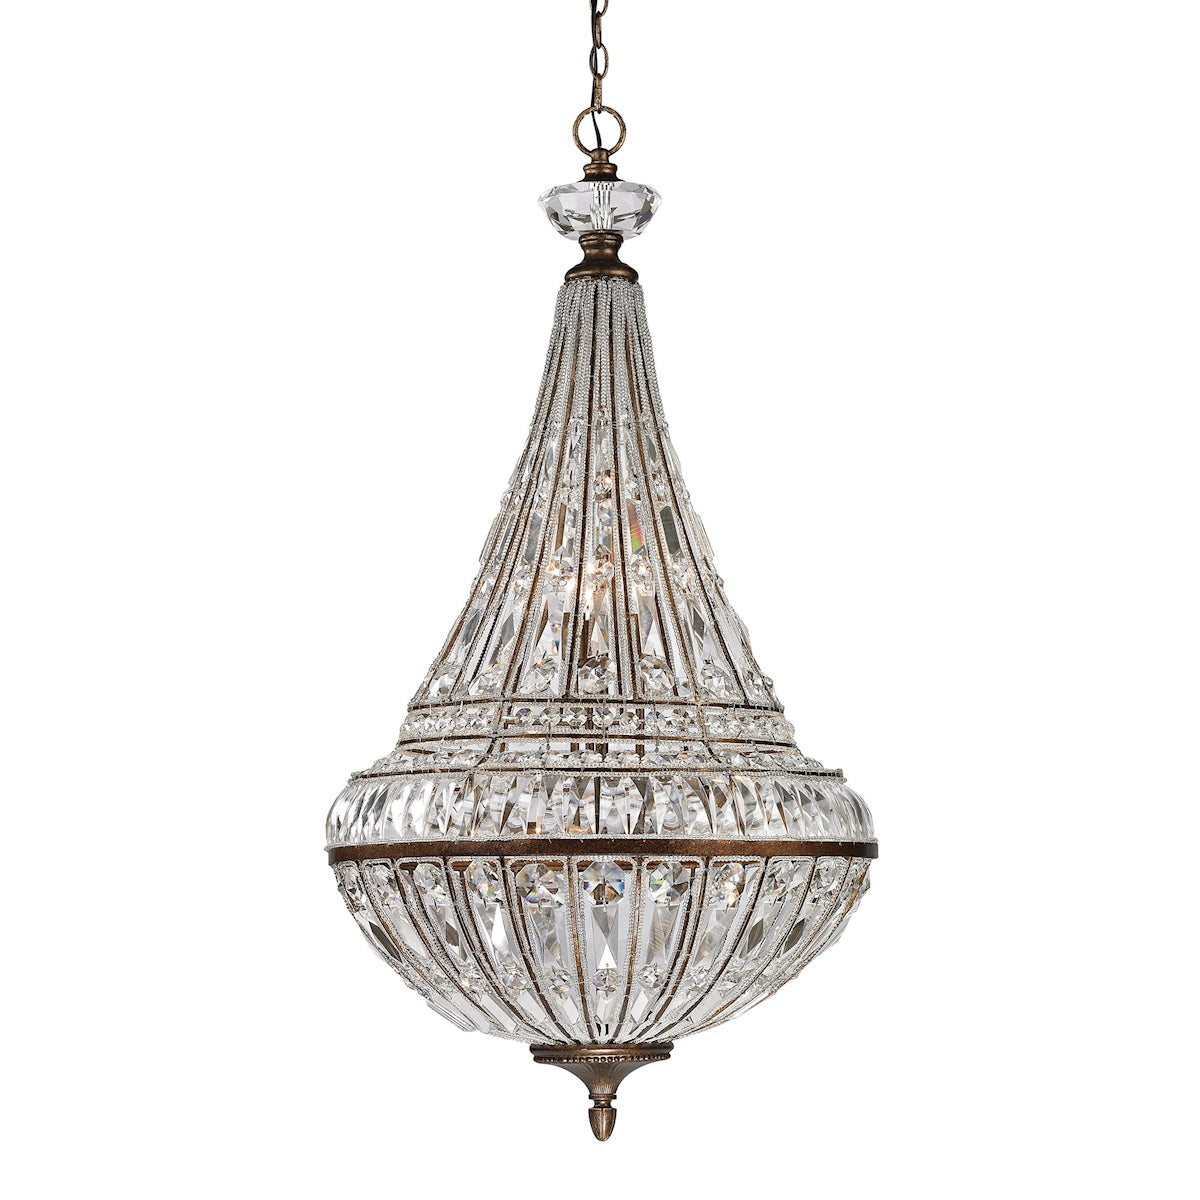 ELK Lighting 46048/6+3 Empire 6+3-Light Chandelier in Mocha with Crystal and Glass Beads